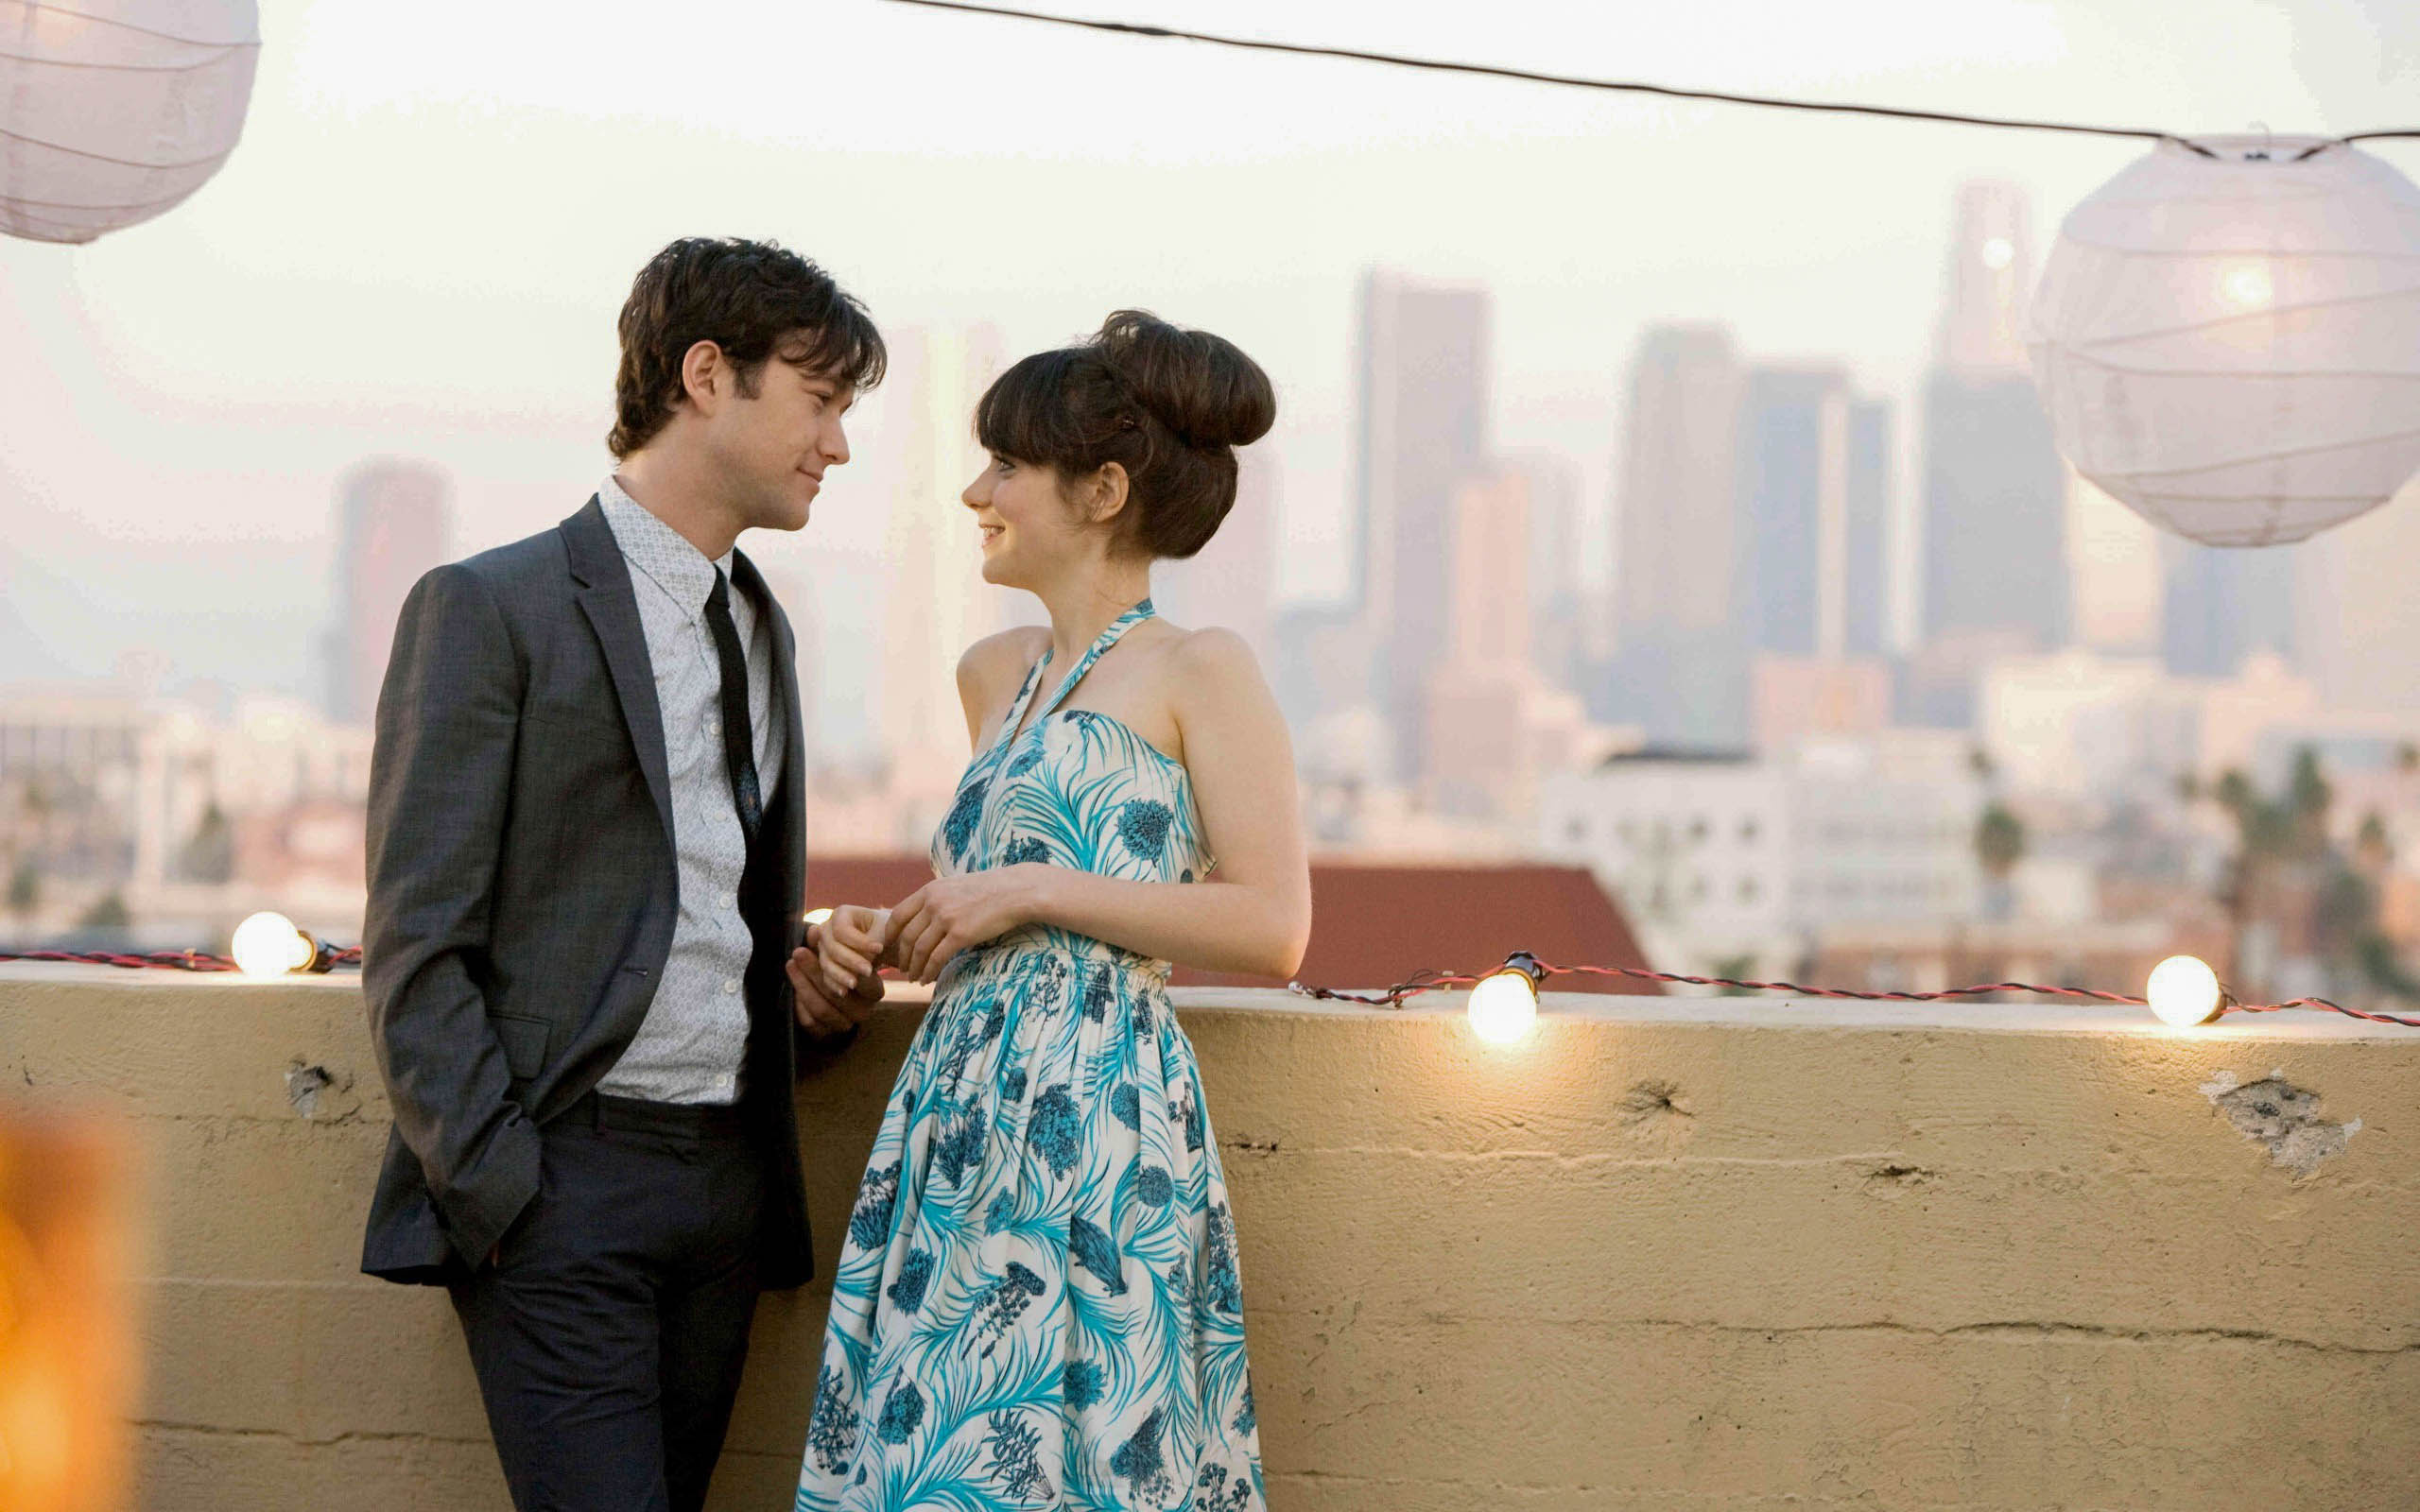 (500) Days of Summer: The film is presented in a nonlinear narrative, jumping between various days within Tom and Summer's relationship. 2560x1600 HD Wallpaper.